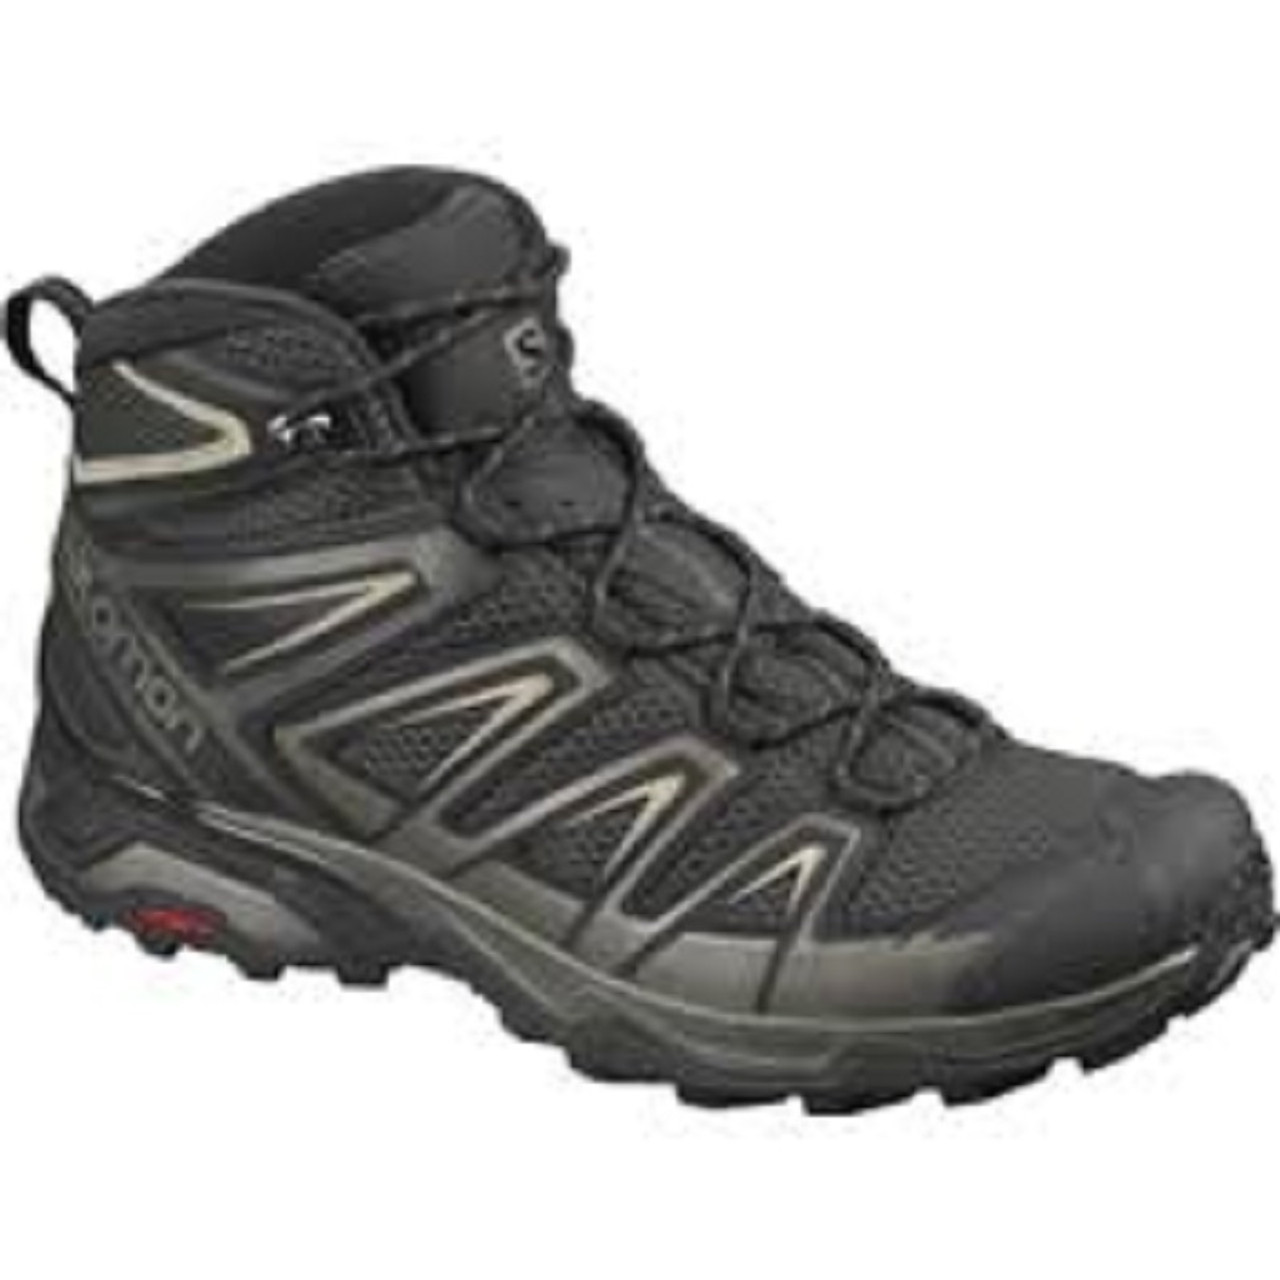 Boots. Merrell Moab - Northern Tier Trading Post